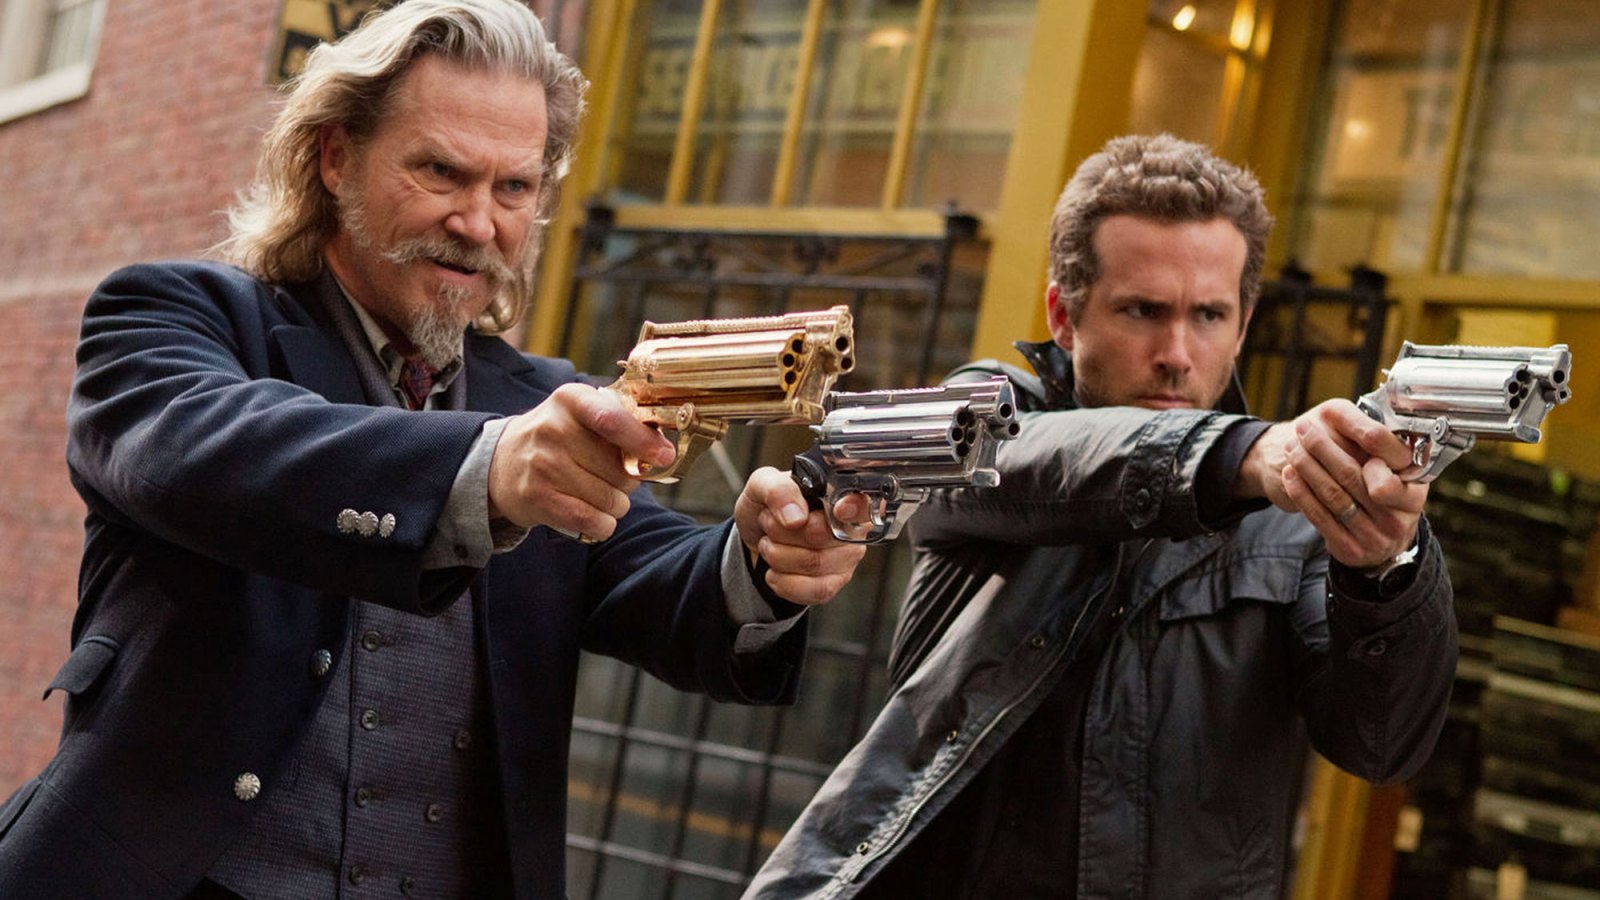 R.I.P.D. Trailer: Ryan Reynolds and Jeff Bridges Fight Crime in the Afterlife